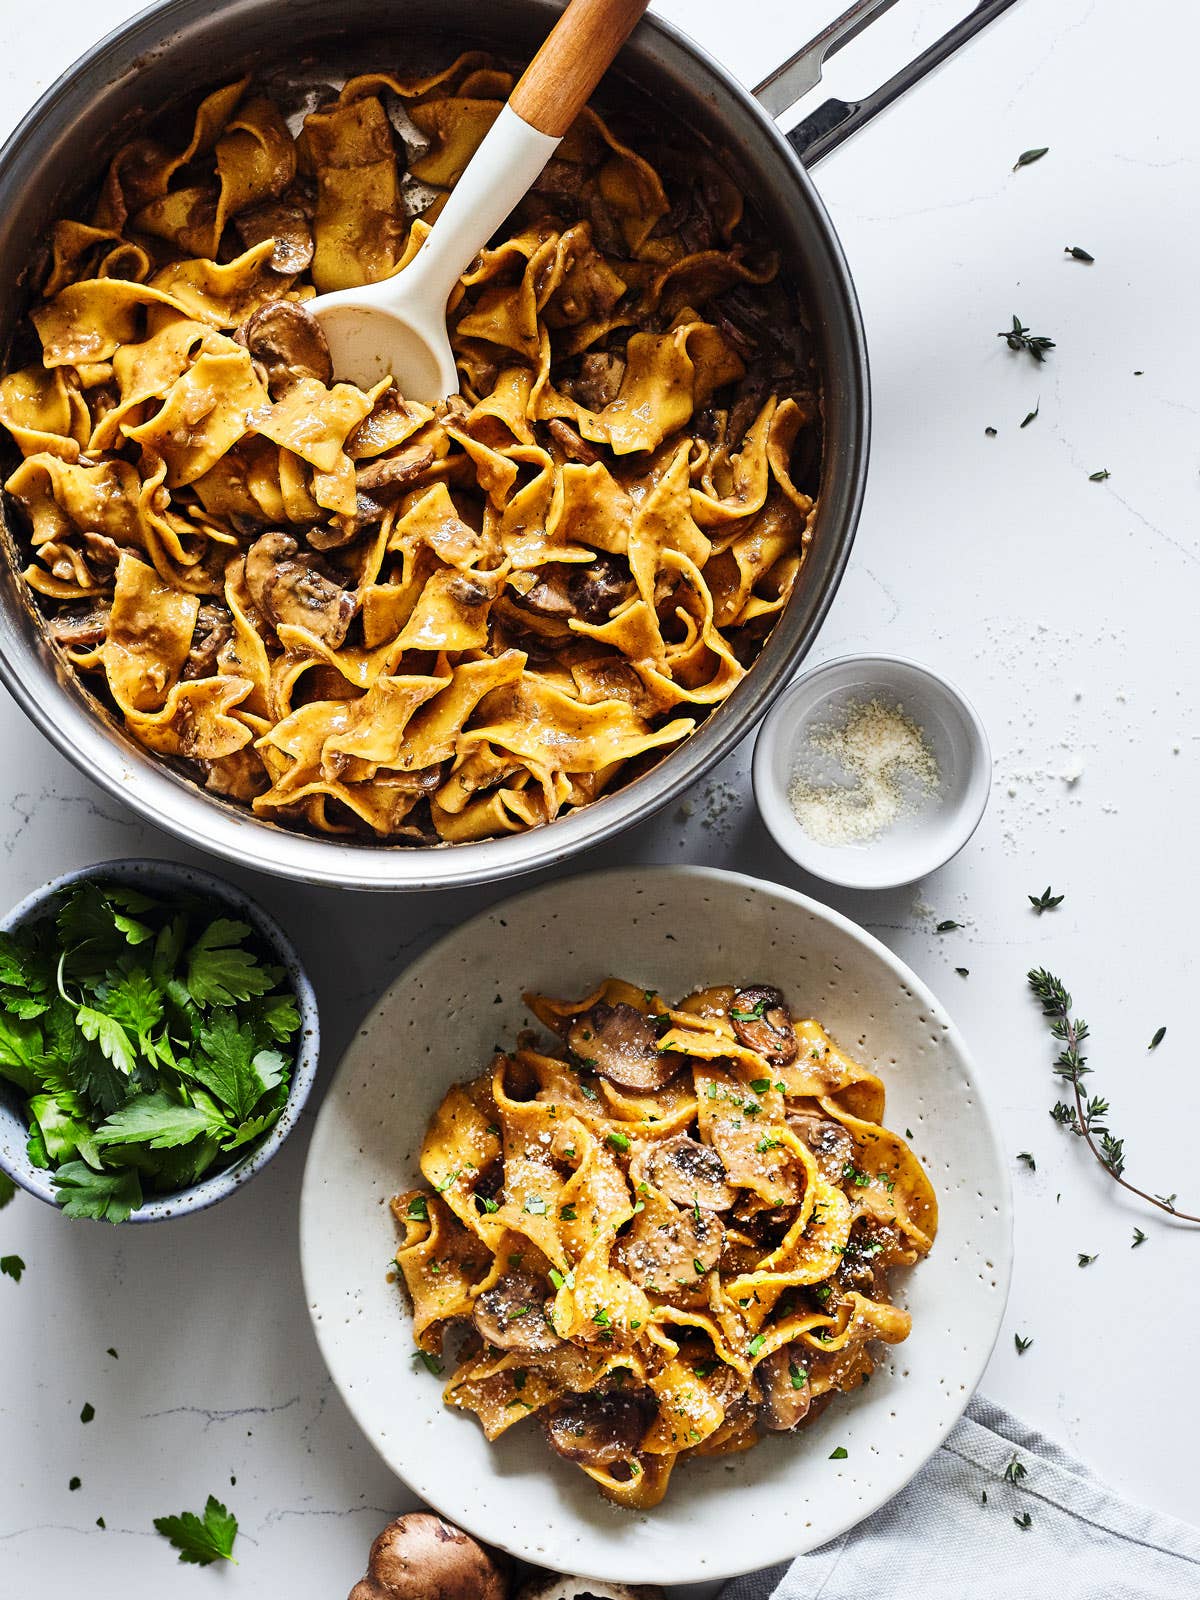 Vegetarian Pasta Recipes We’d Give Up Meat For